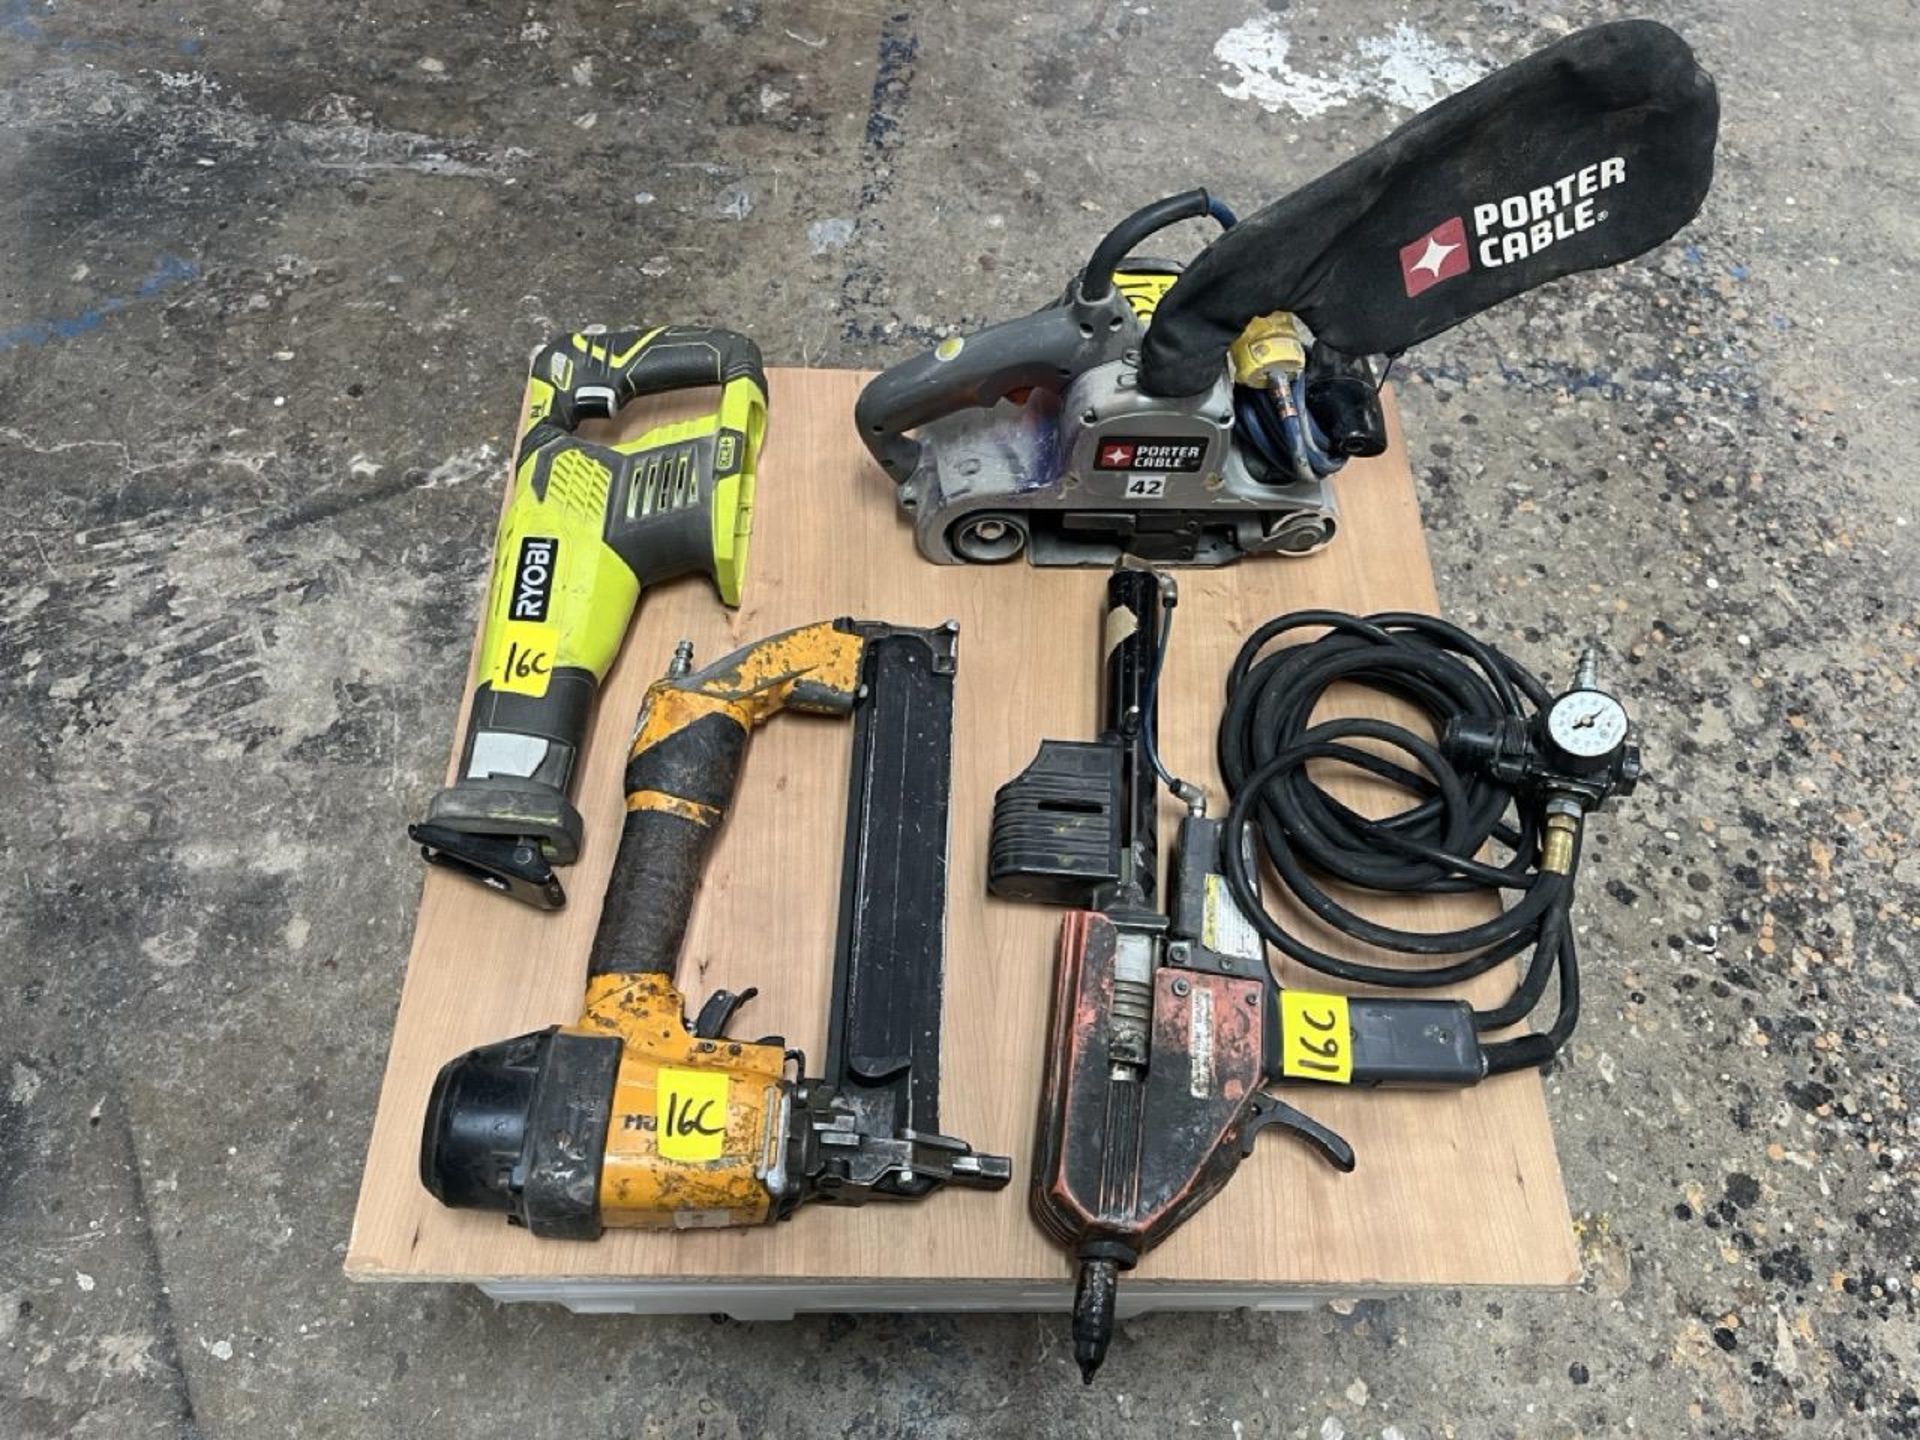 Lot of 4 pieces contains: 1 Porter electric sander with dust collector; 1 Ryobi wood saw without ba